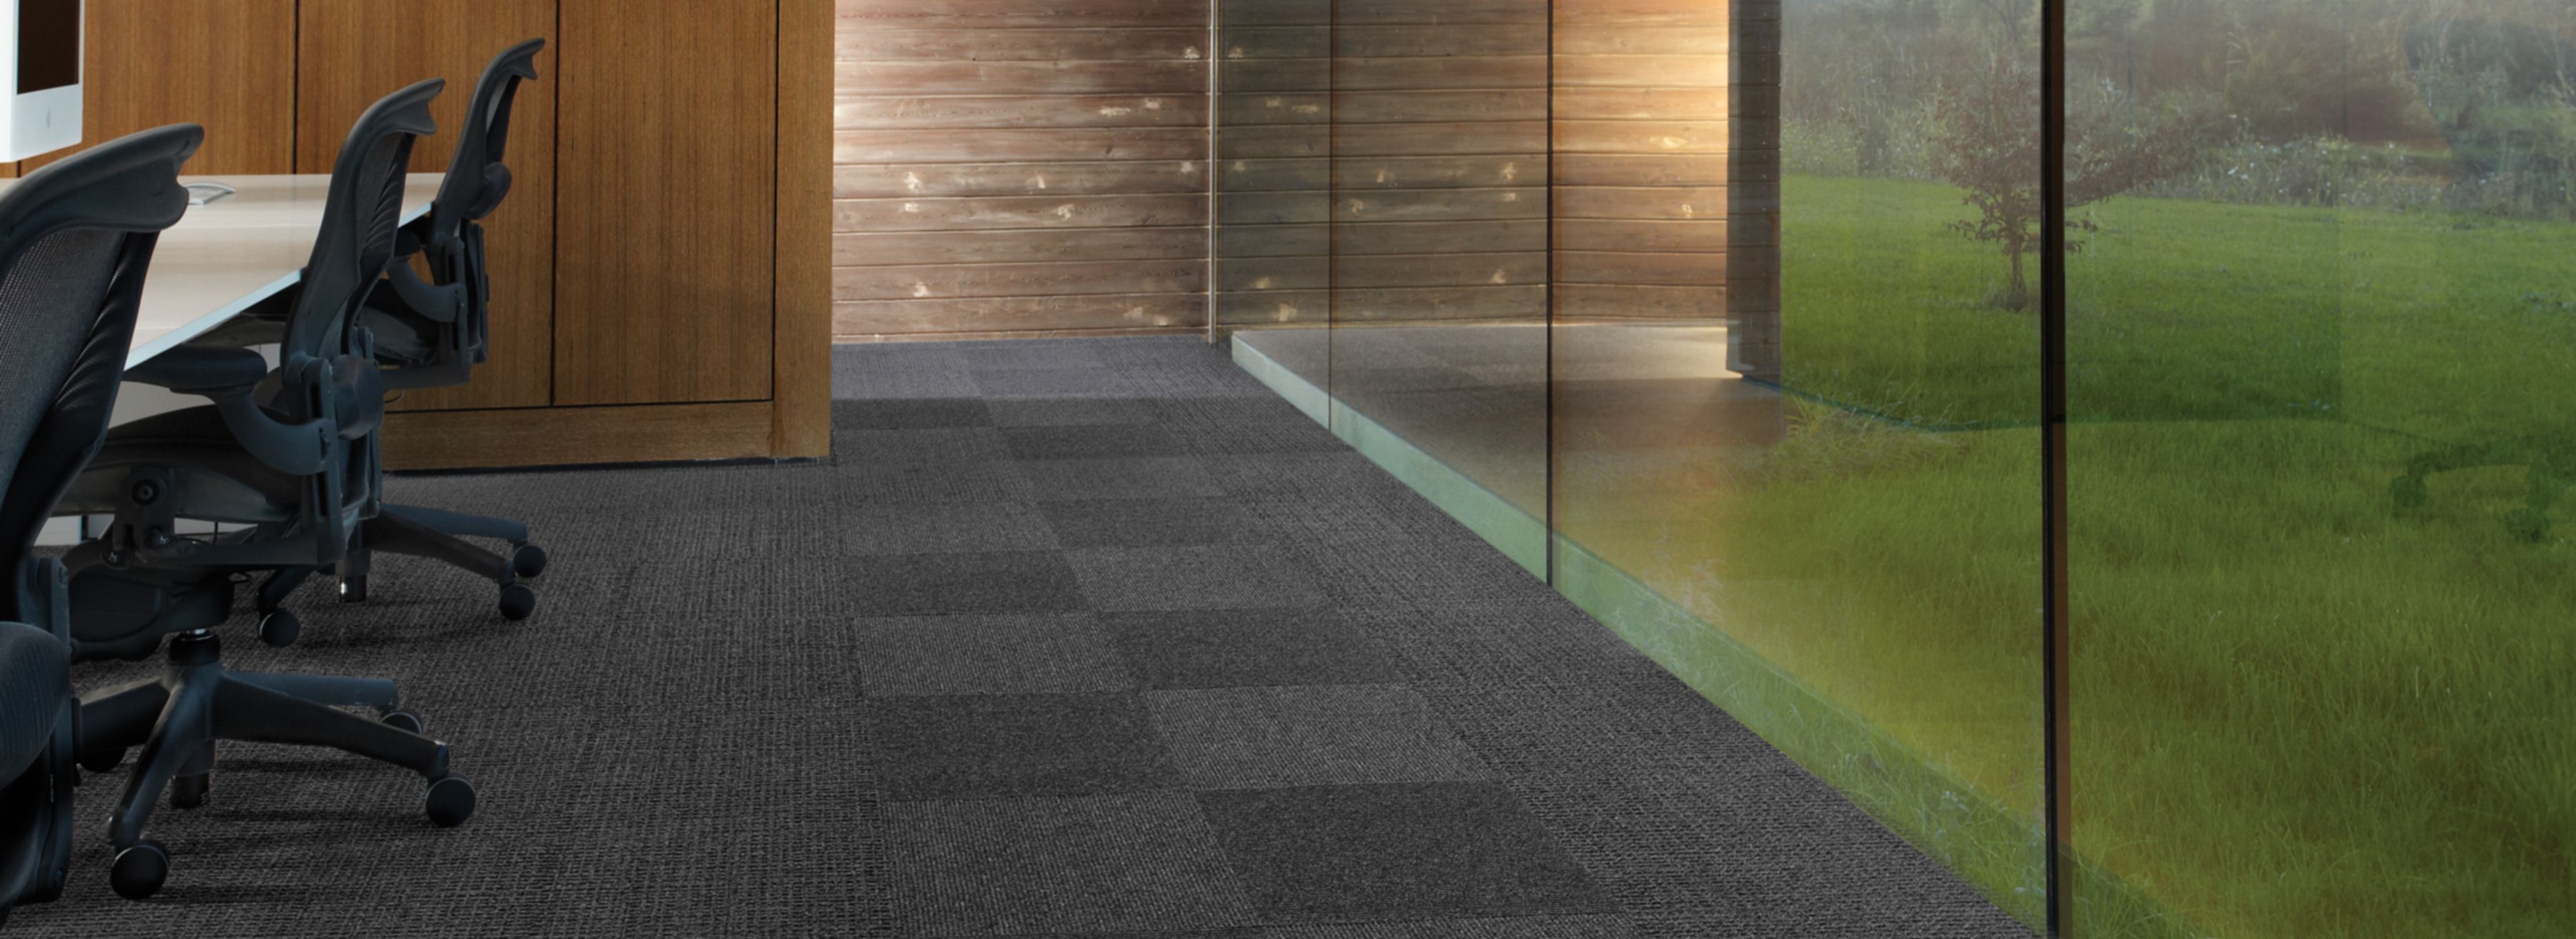 Interface UR202 and UR203 carpet tile in conference room with glass wall imagen número 1